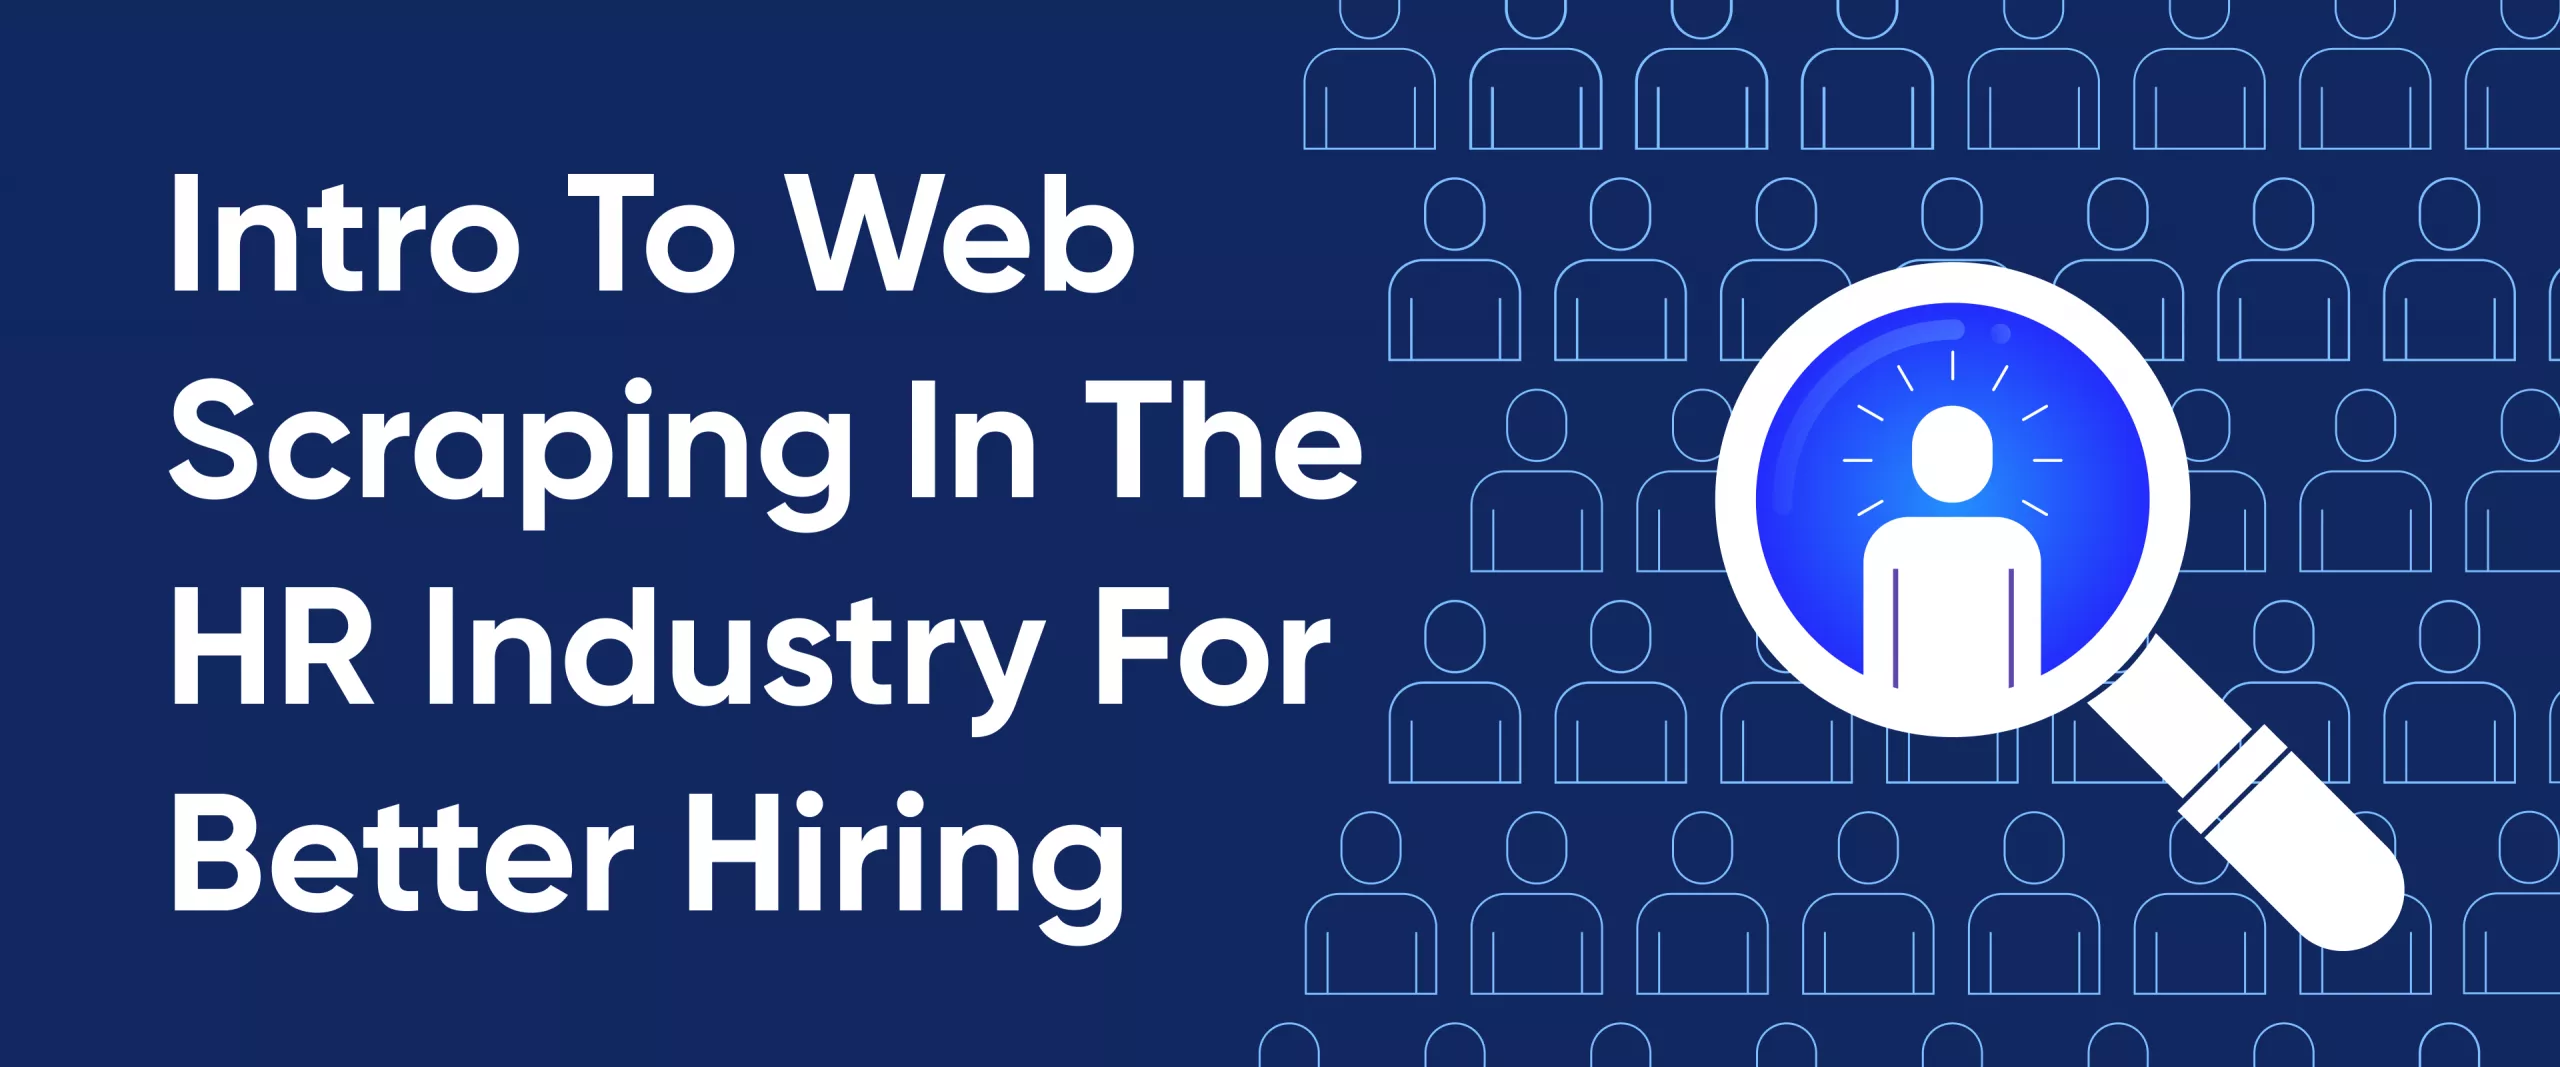 How to Use Web Scraping for Recruitment